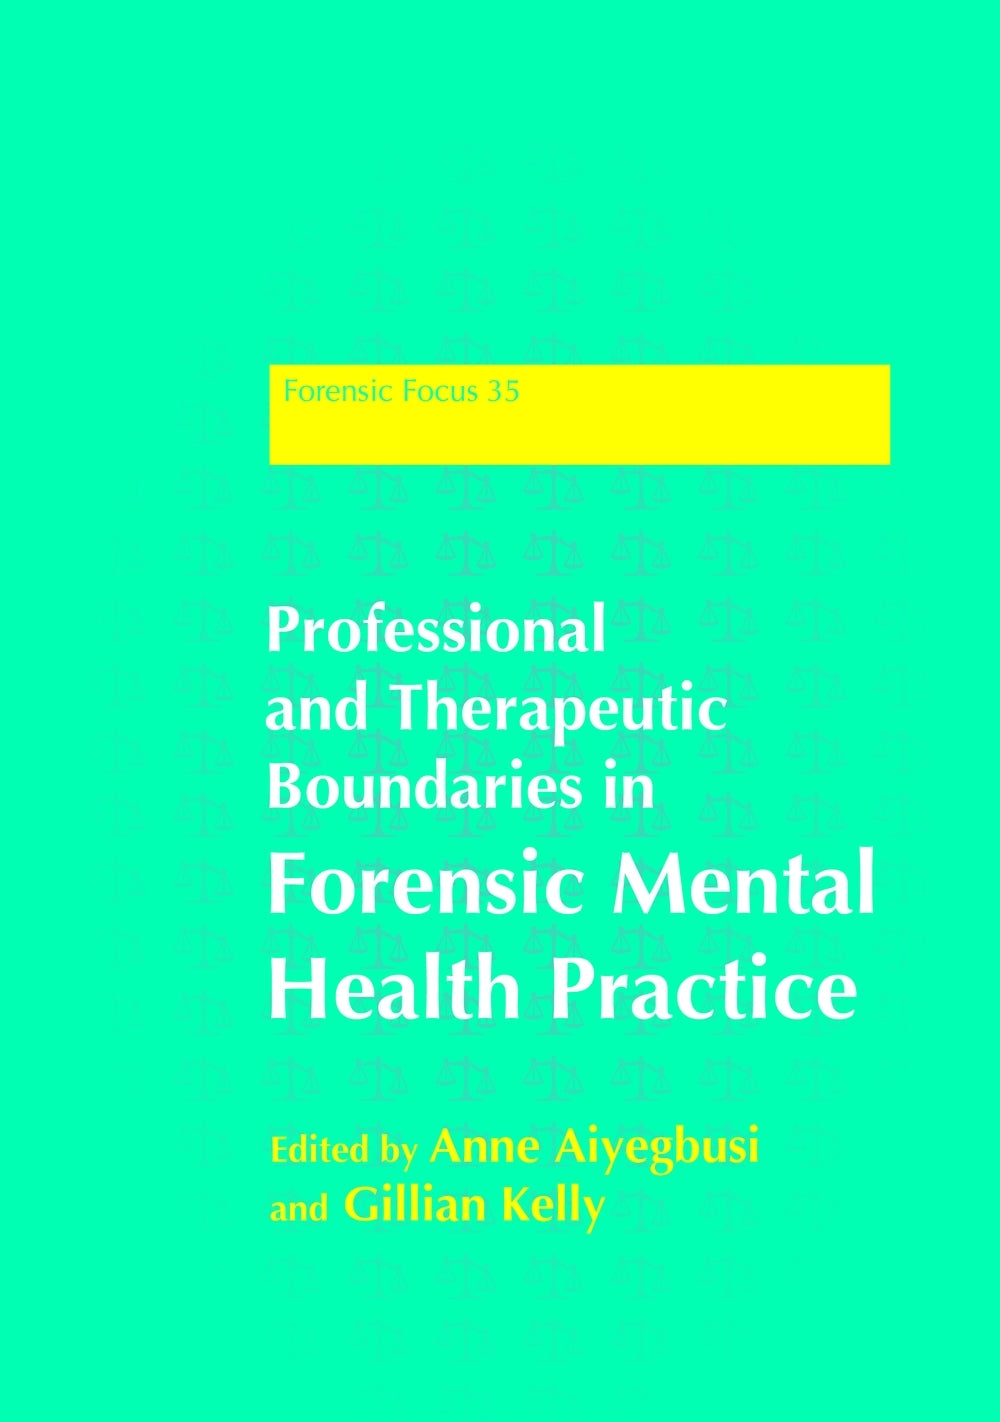 Professional and Therapeutic Boundaries in Forensic Mental Health Practice by Anne Aiyegbusi, Gillian Kelly, No Author Listed